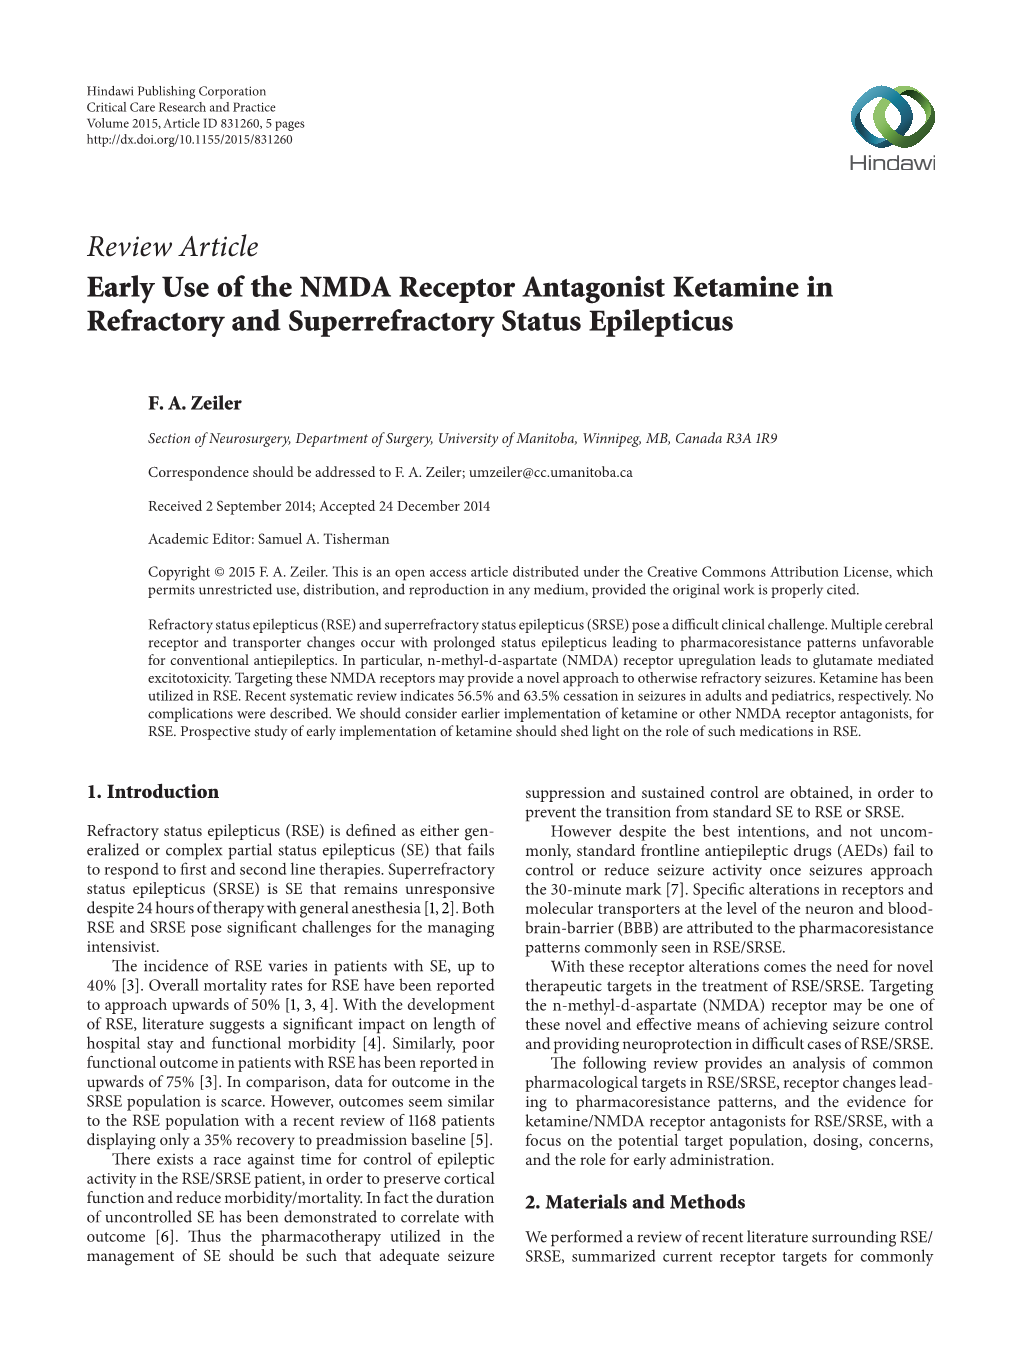 Review Article Early Use of the NMDA Receptor Antagonist Ketamine in Refractory and Superrefractory Status Epilepticus